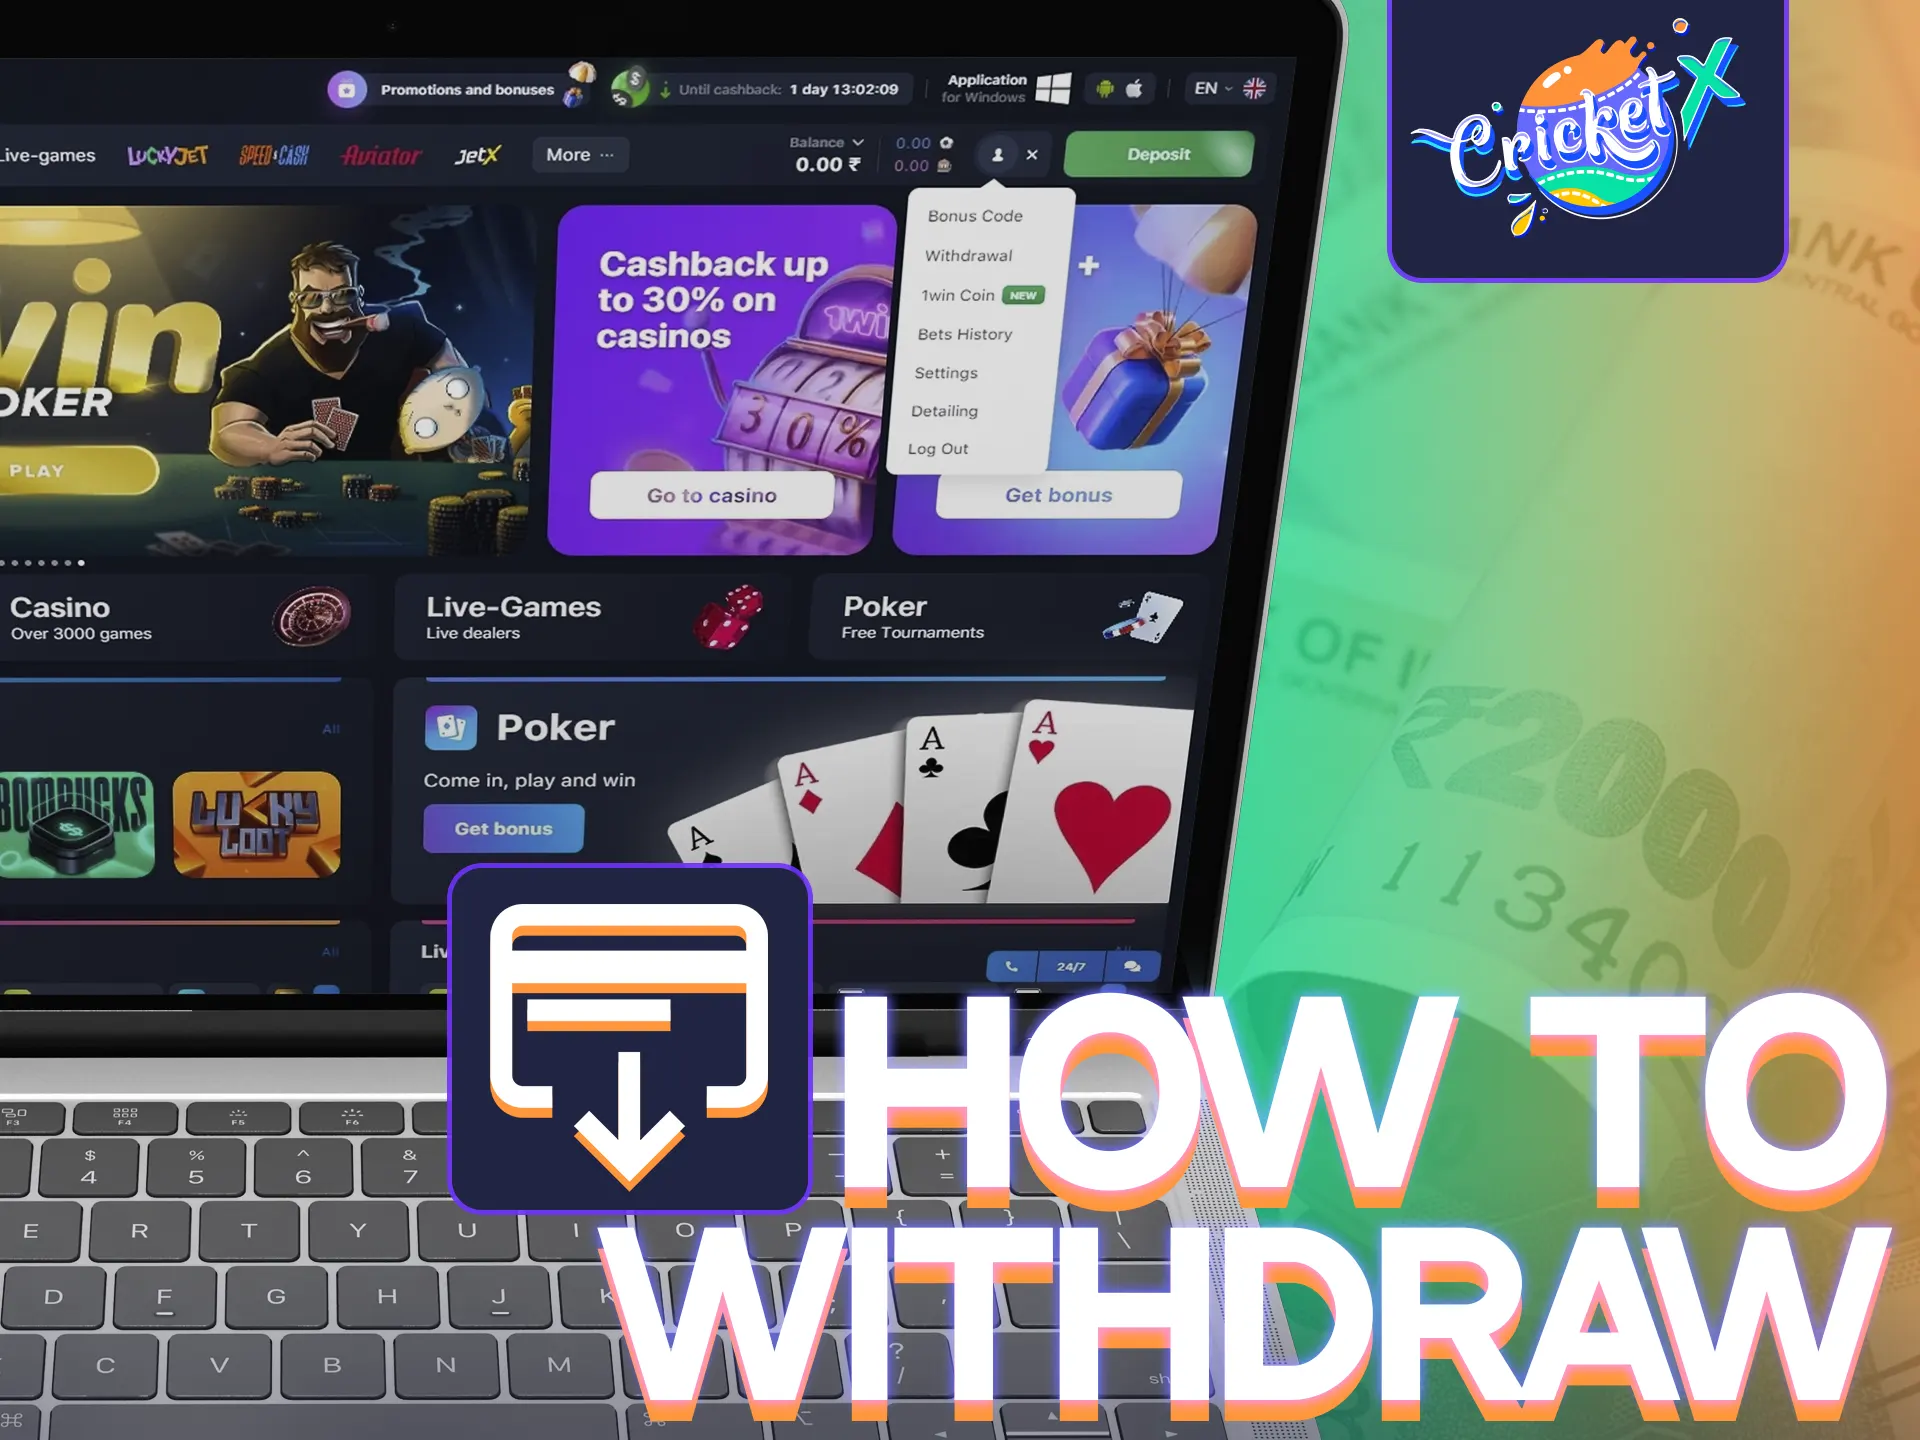 Find out how to withdraw winnings from the CricketX game.